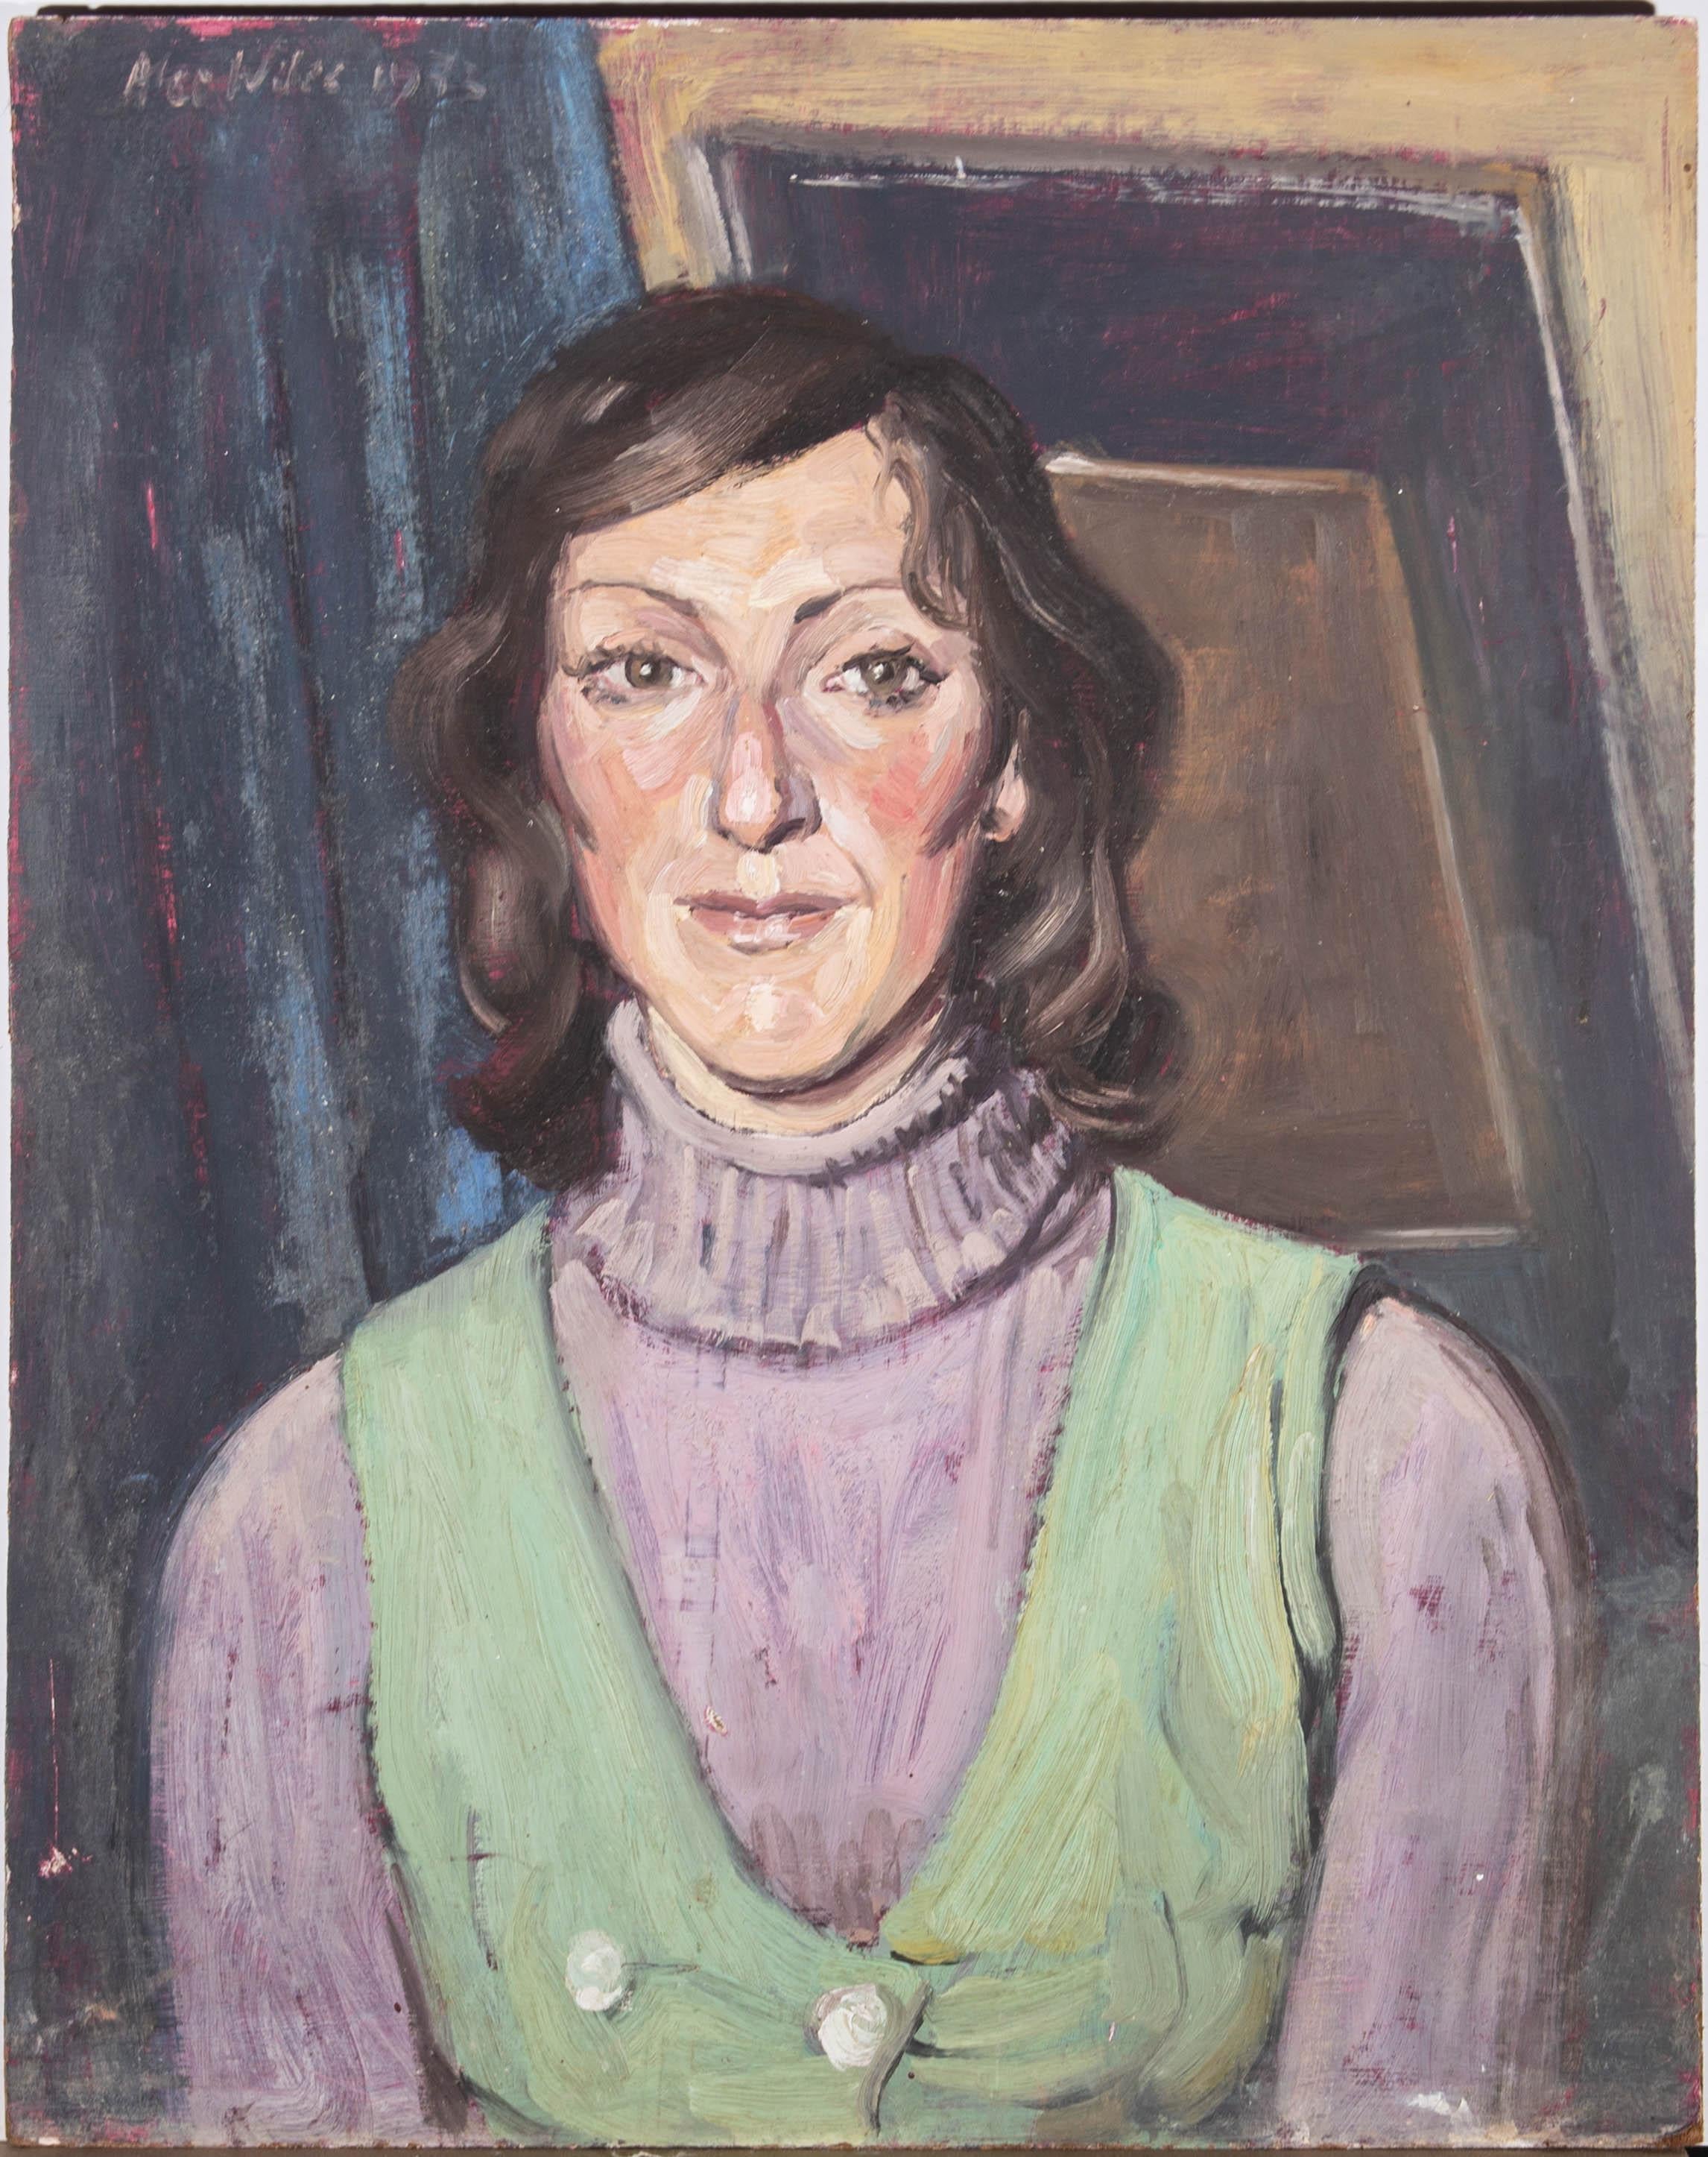 An attractively coloured portrait showing a young woman with beautiful brown eyes, wearing a lilac jumper and green house apron. The artist has used confident gestural brushstrokes to build up tone and form in the sitter's face. The artist has